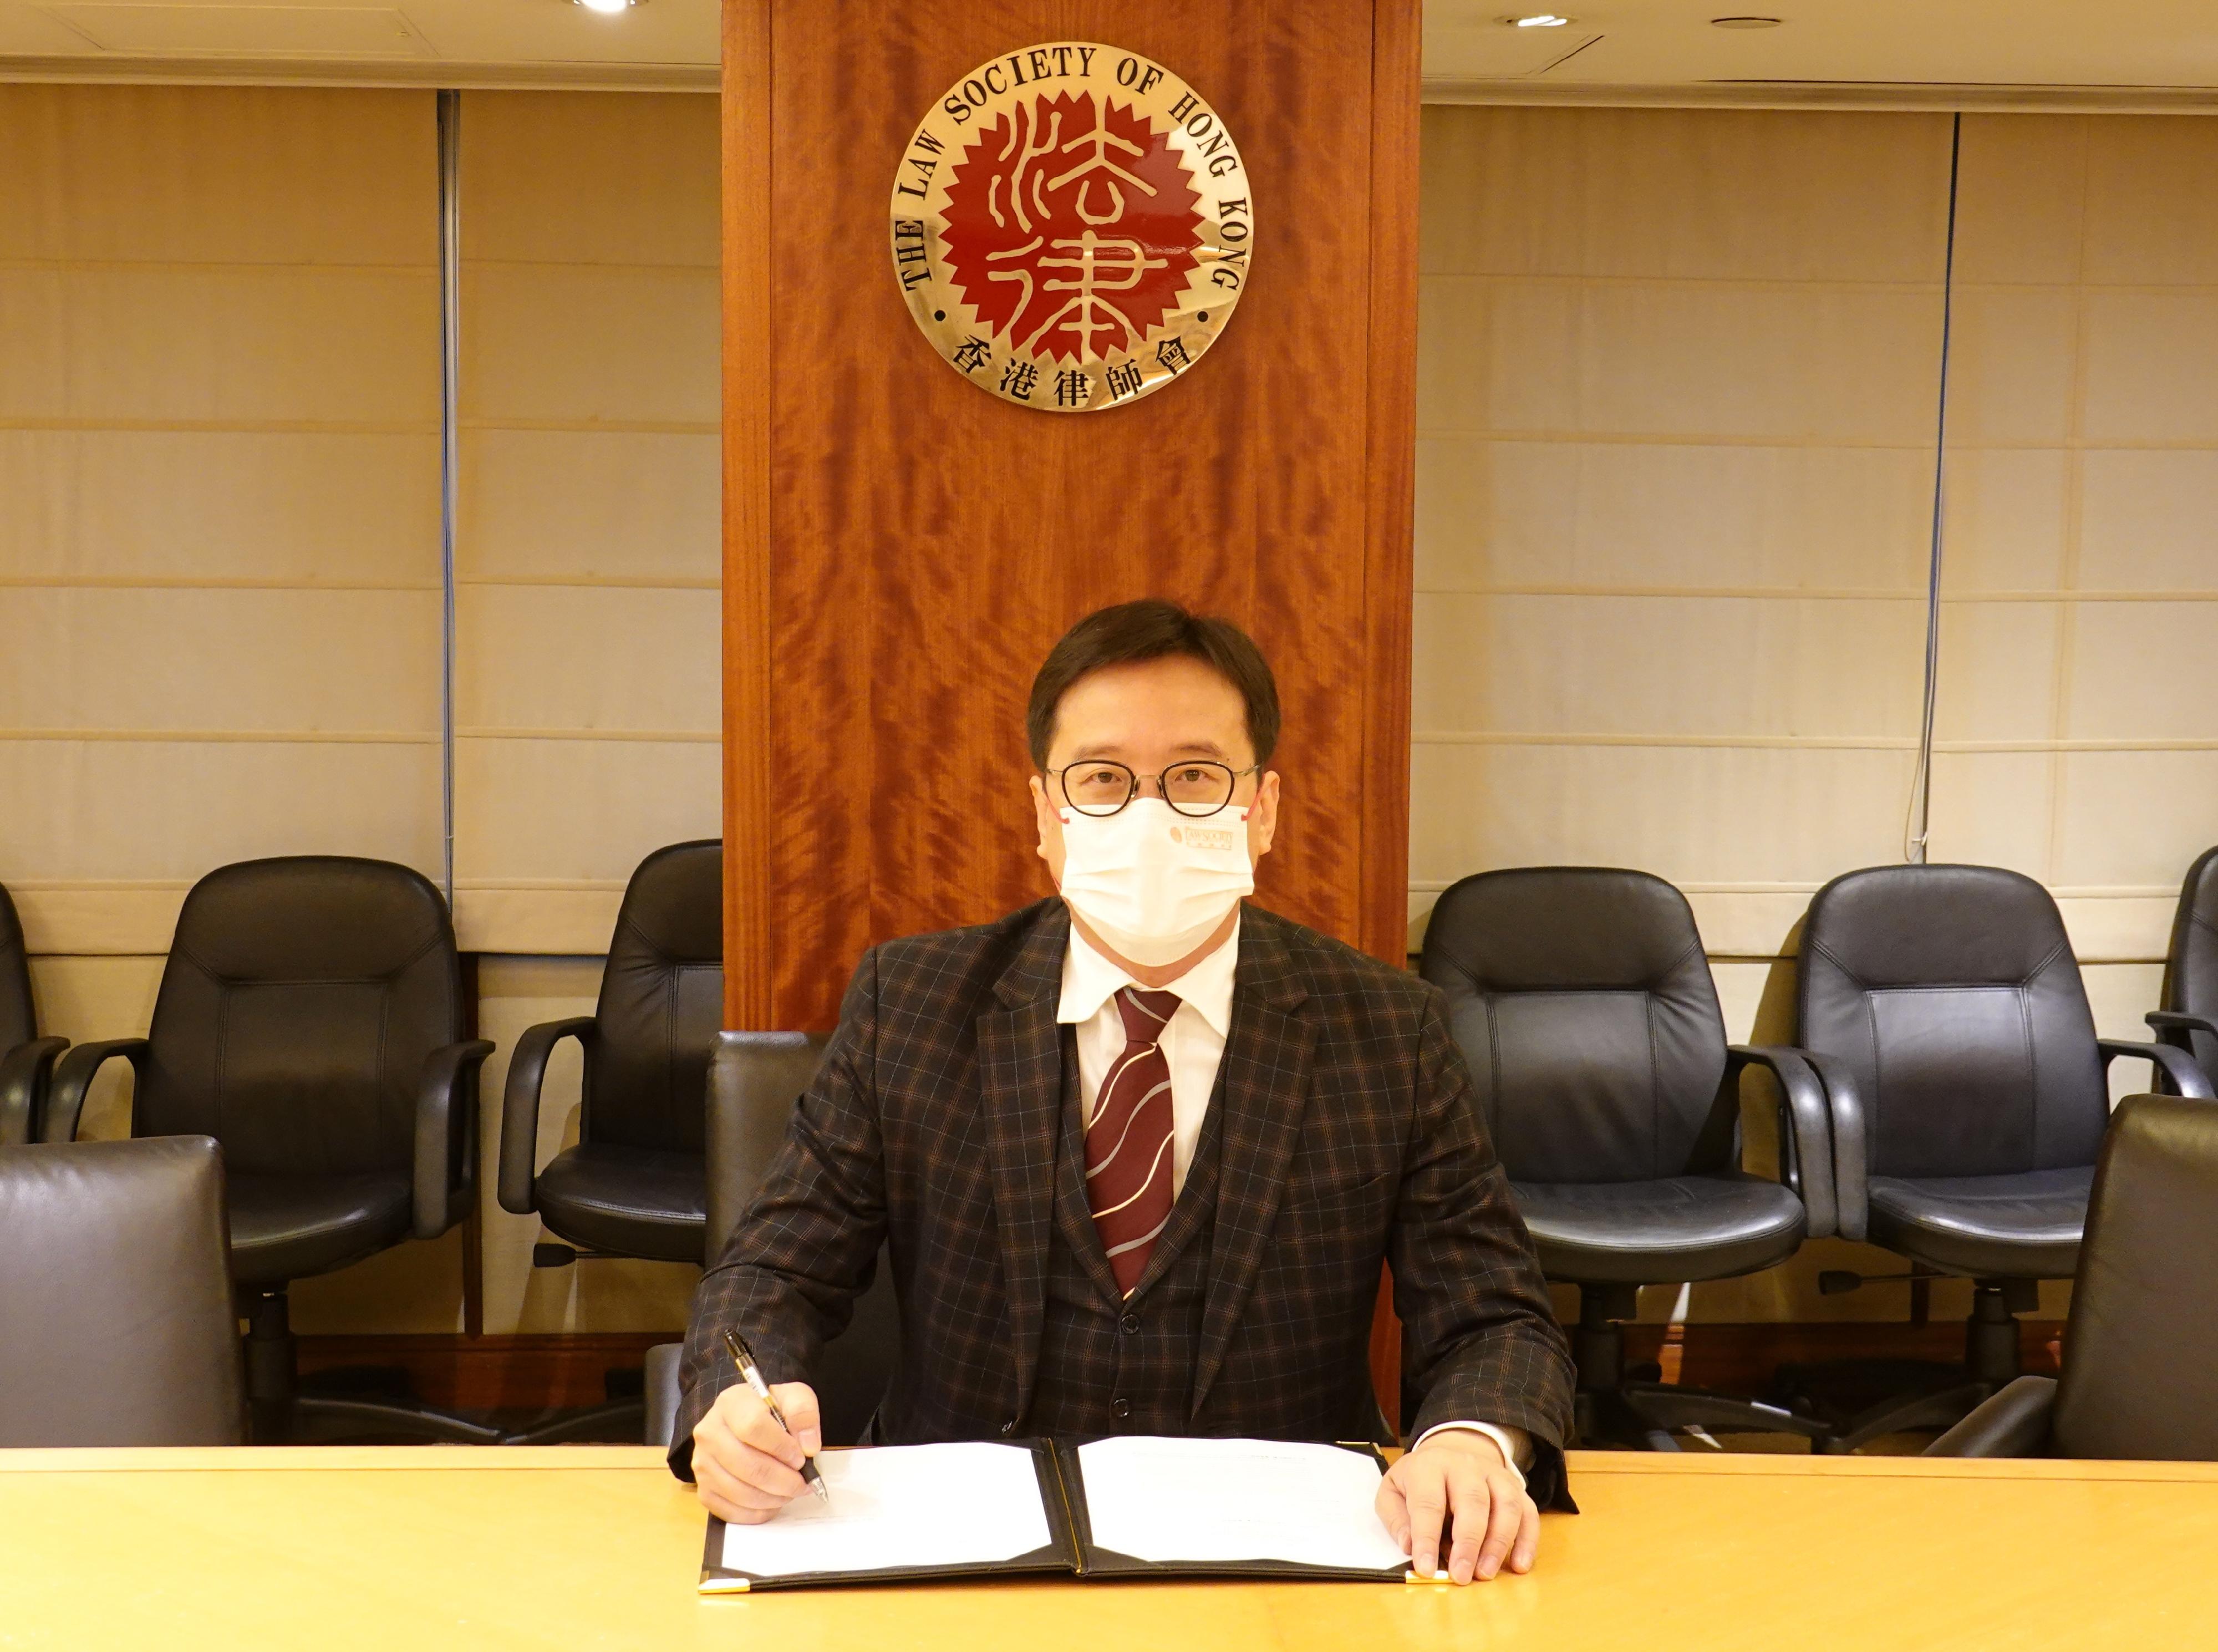 The second round of the Legal Talent Recruitment Scheme (Trainee Solicitors) (the Legal Talent Scheme 2022) will be open for application on April 11. Photo shows the President of the Law Society of Hong Kong, Mr Chan Chak-ming, signing a memorandum of understanding with the Department of Justice on the administration of the Legal Talent Scheme 2022 today (March 28).